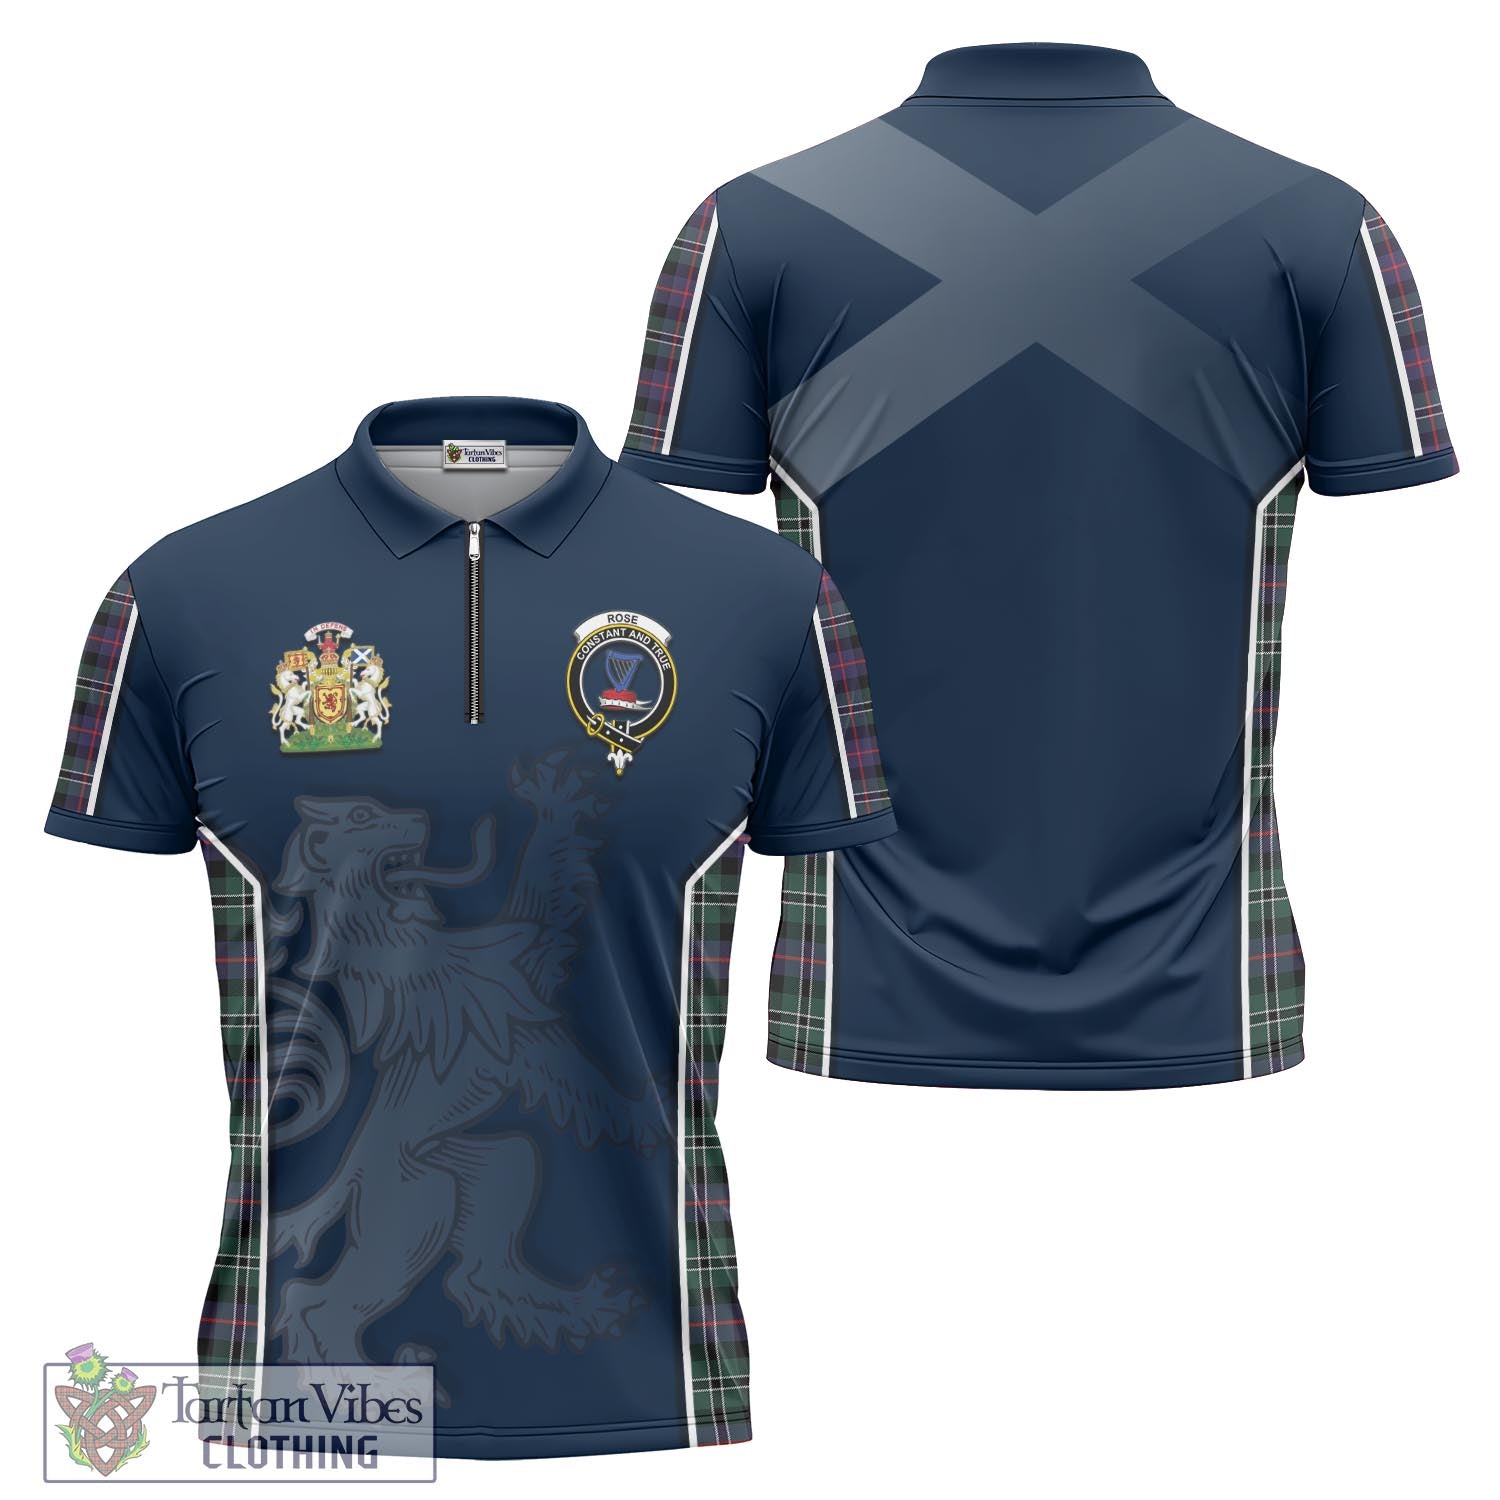 Tartan Vibes Clothing Rose Hunting Modern Tartan Zipper Polo Shirt with Family Crest and Lion Rampant Vibes Sport Style